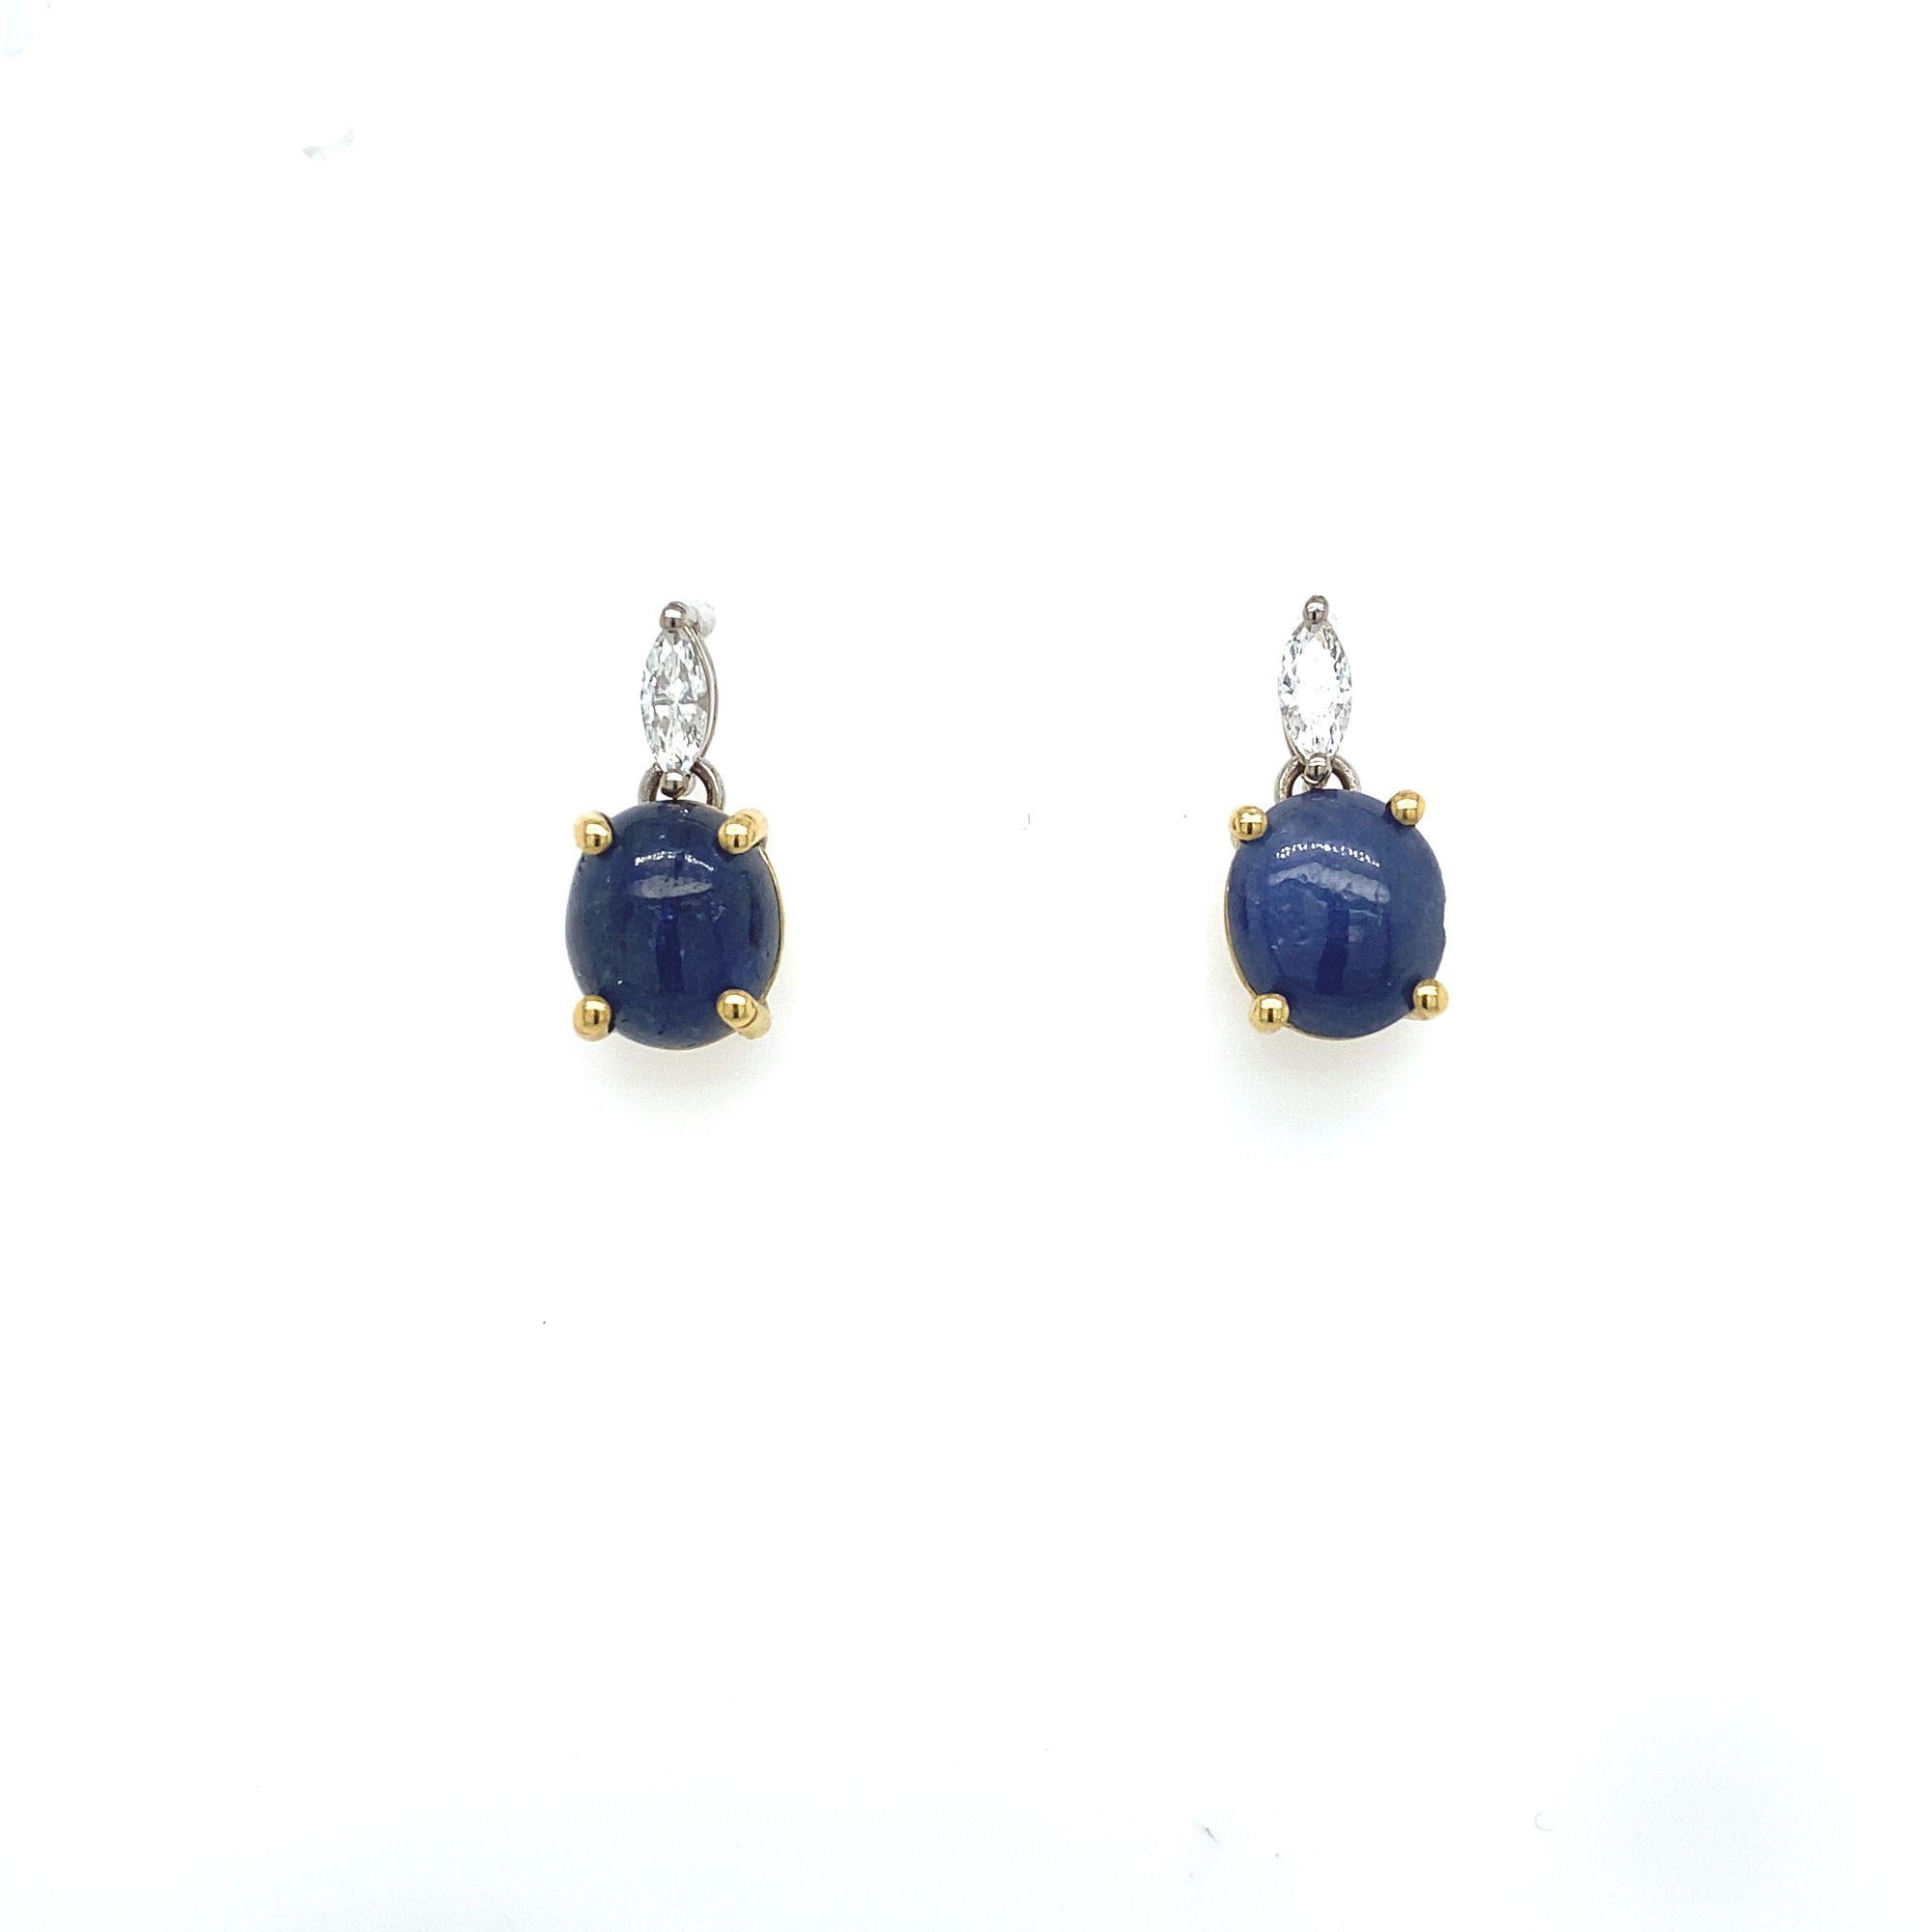 New 9.0ct Cabachon Sapphires with Matching 0.30ct Marquise Diamond Earrings

18ct Yellow Gold & Platinum Fine Quality Cabochon Sapphires with Matching Fine Quality Marquise Diamond Earrings 

Additional Information:
Total Diamond Weight: